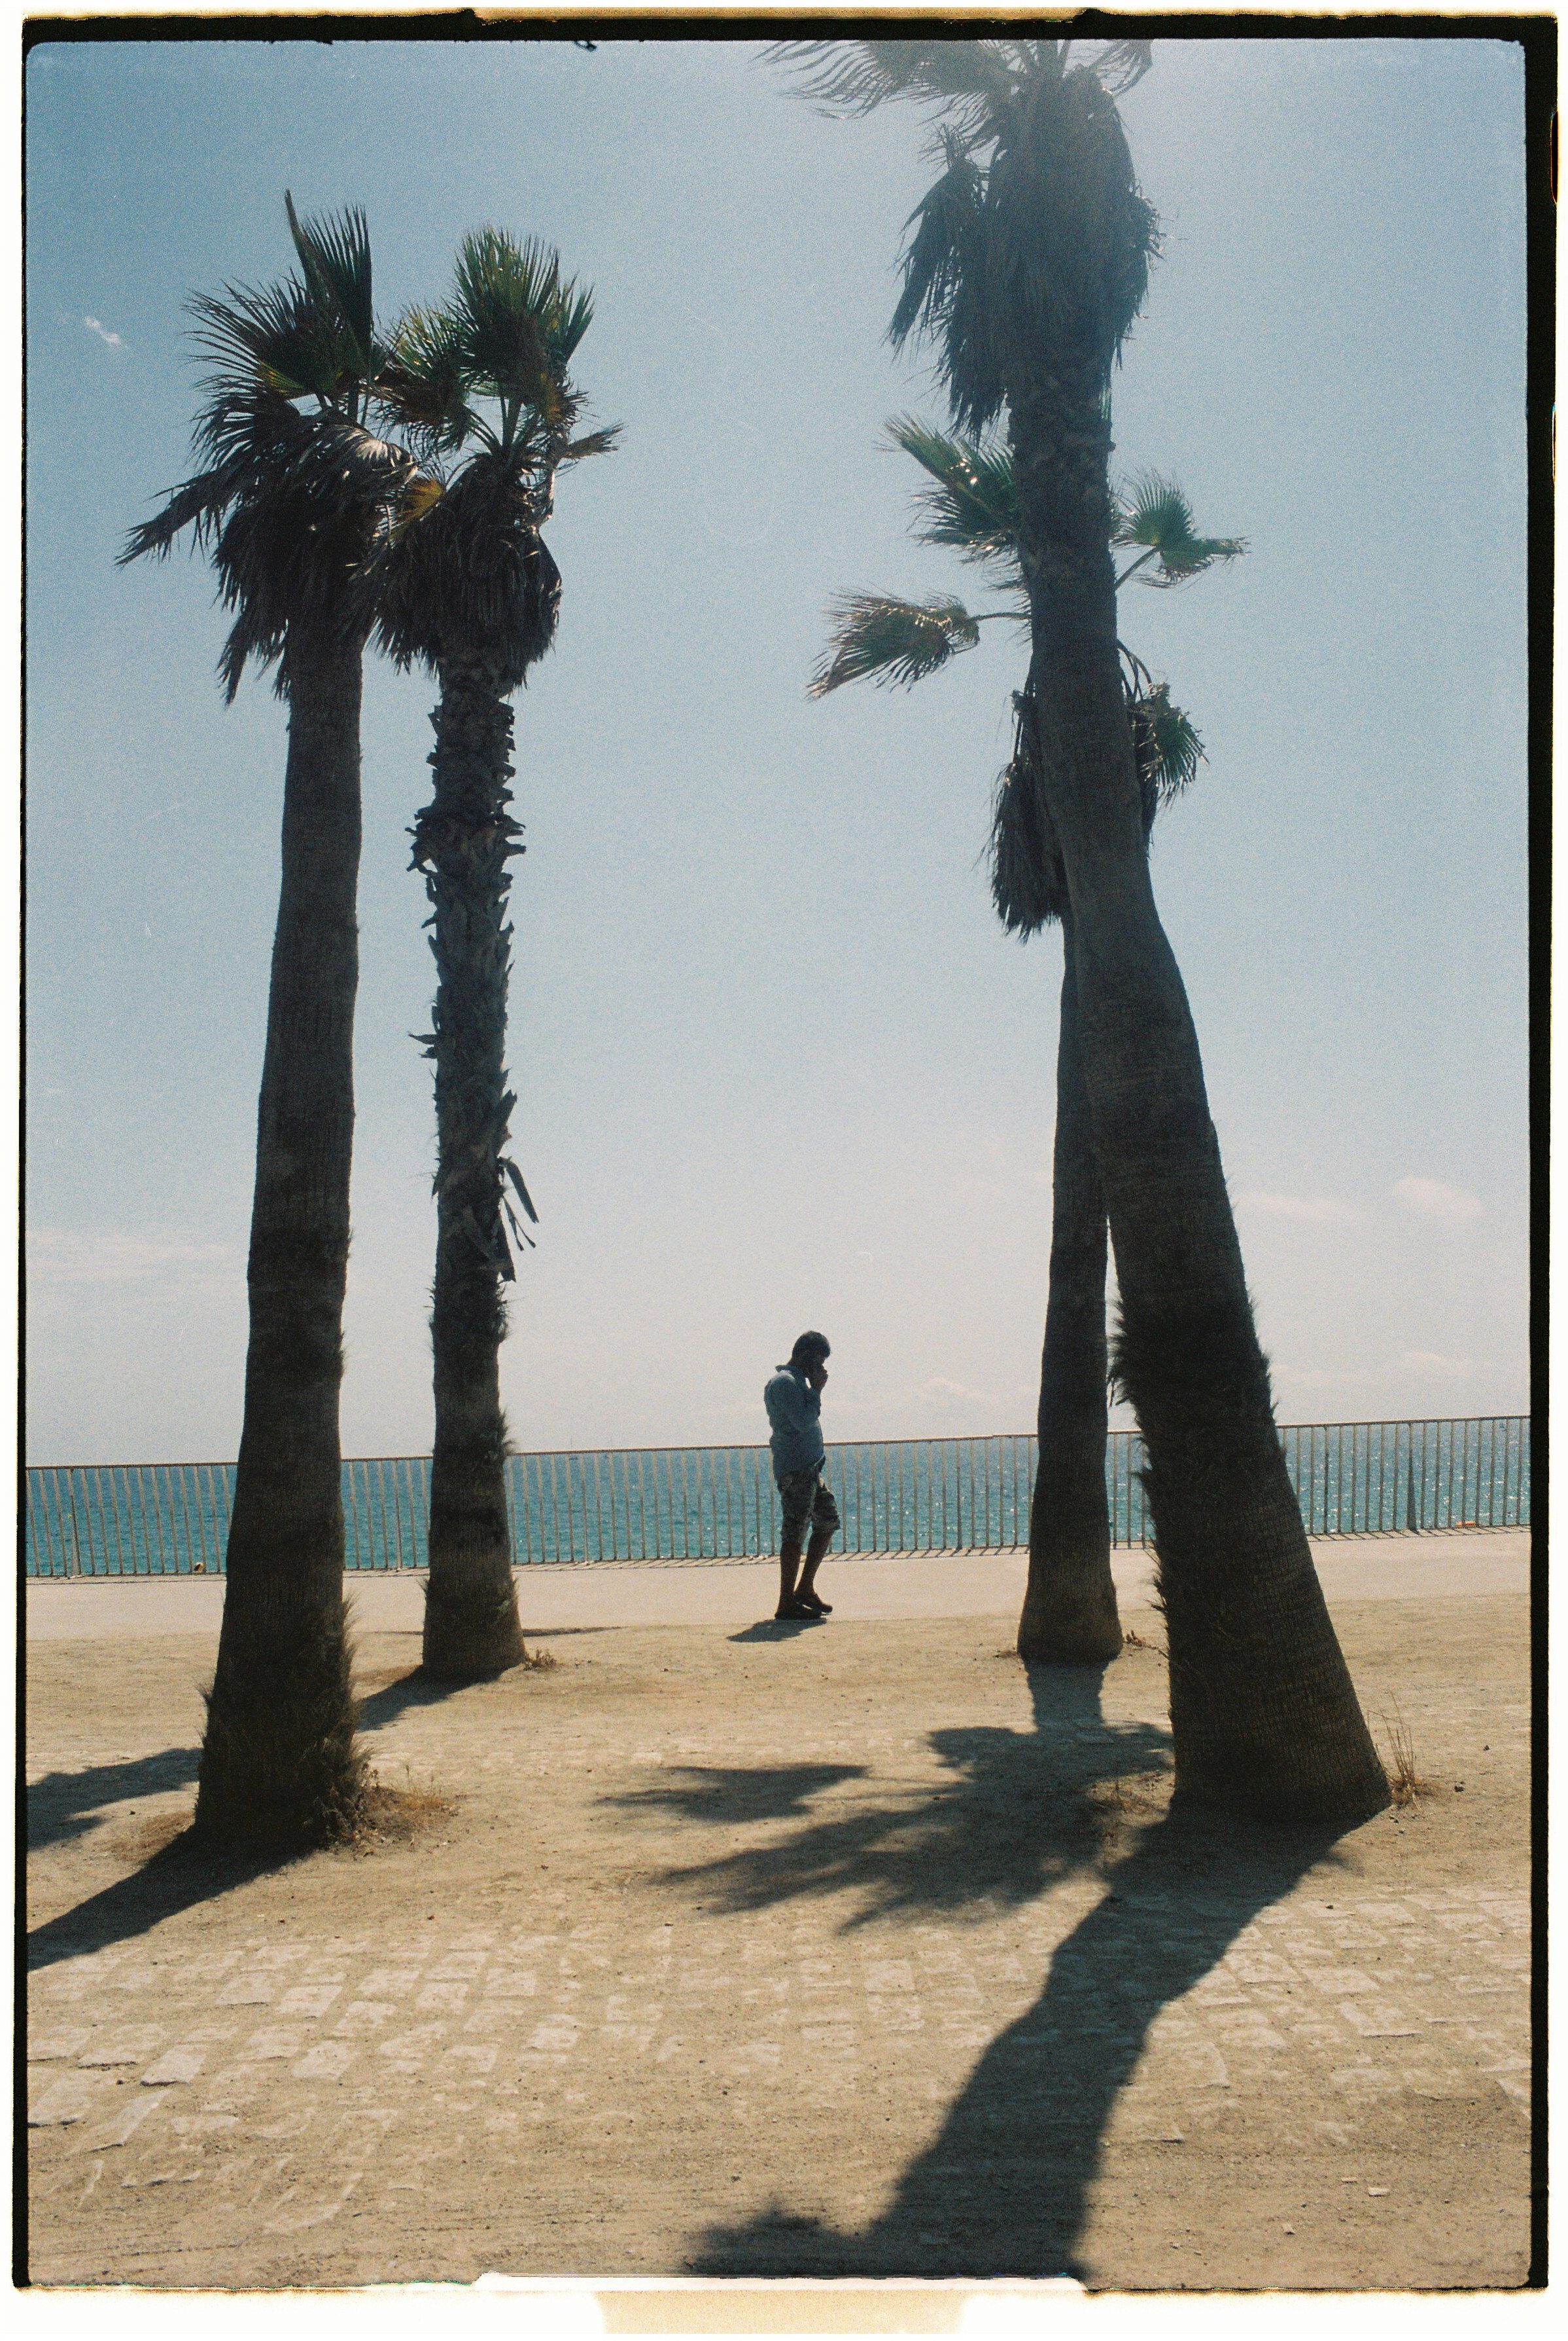 Palm trees at a beach in Barcelona, August '21